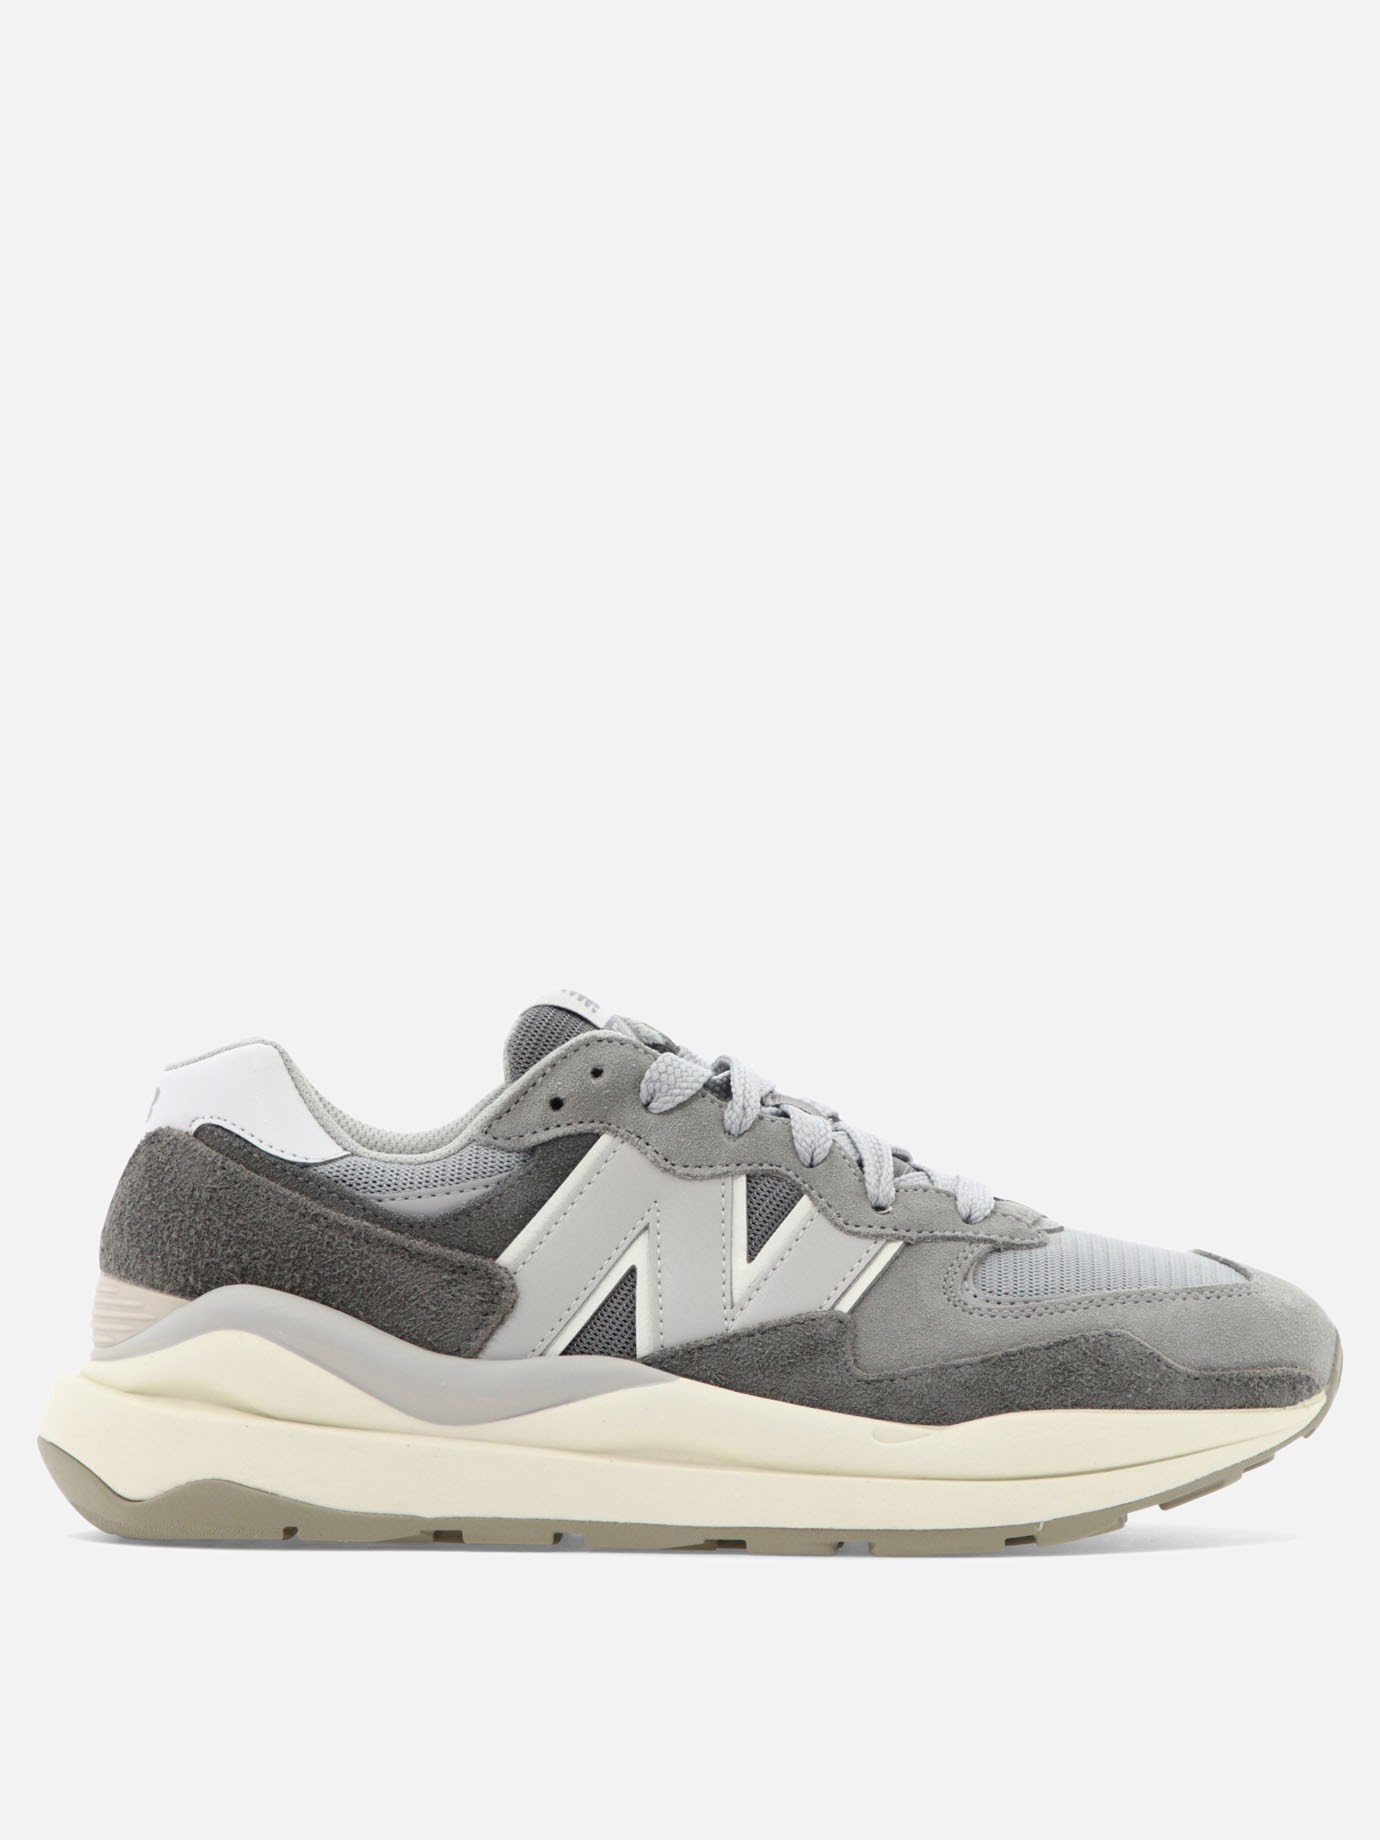 Sneaker  M5740  by New Balance